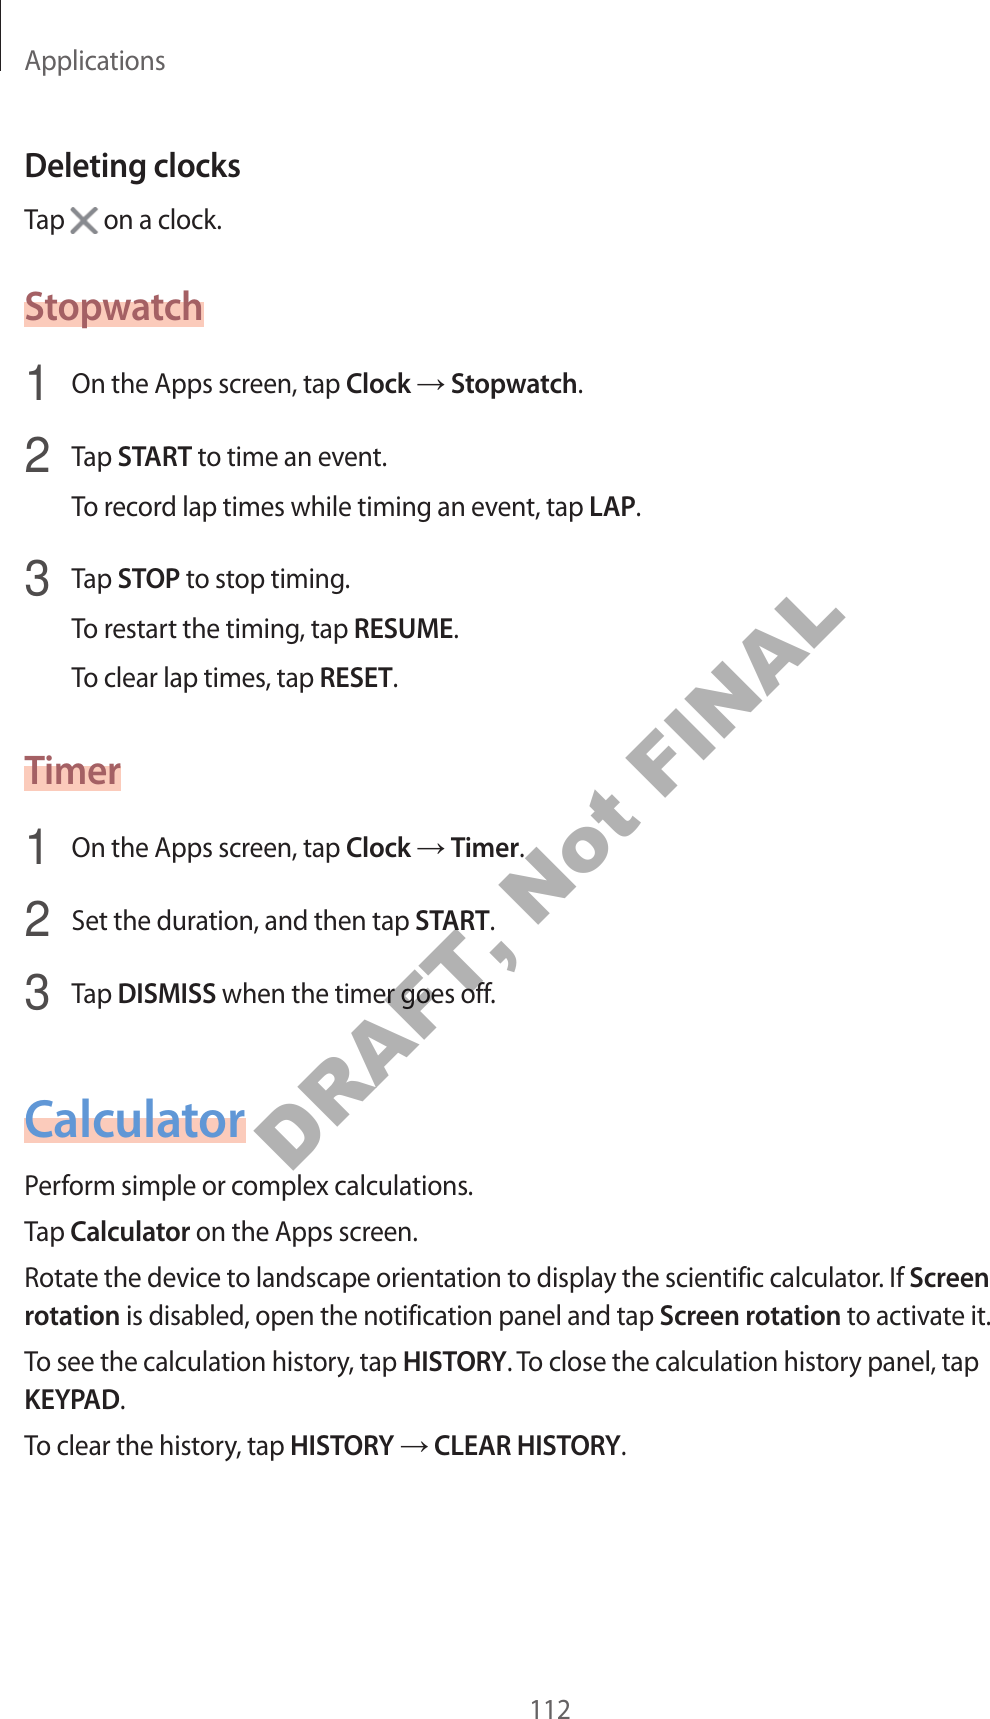 Applications112Deleting clocksTap   on a clock.Stopwatch1  On the Apps screen, tap Clock  Stopwatch.2  Tap START to time an even t.To recor d lap times while timing an ev en t, tap LAP.3  Tap STOP to stop timing .To restart the timing, tap RESUME.To clear lap times, tap RESET.Timer1  On the Apps screen, tap Clock  Timer.2  Set the duration, and then tap START.3  Tap DISMISS when the timer goes off.CalculatorP erform simple or complex calculations .Tap Calculator on the Apps screen.Rotate the device t o landscape orientation t o display the scien tific calculat or. If Screen rotation is disabled, open the notification panel and tap Screen rota tion to activate it.To see the calculation history , tap HISTORY. To close the calculation history panel, tap KEYPAD.To clear the history, tap HISTORY  CLEAR HISTORY.DRAFT, Not FINAL